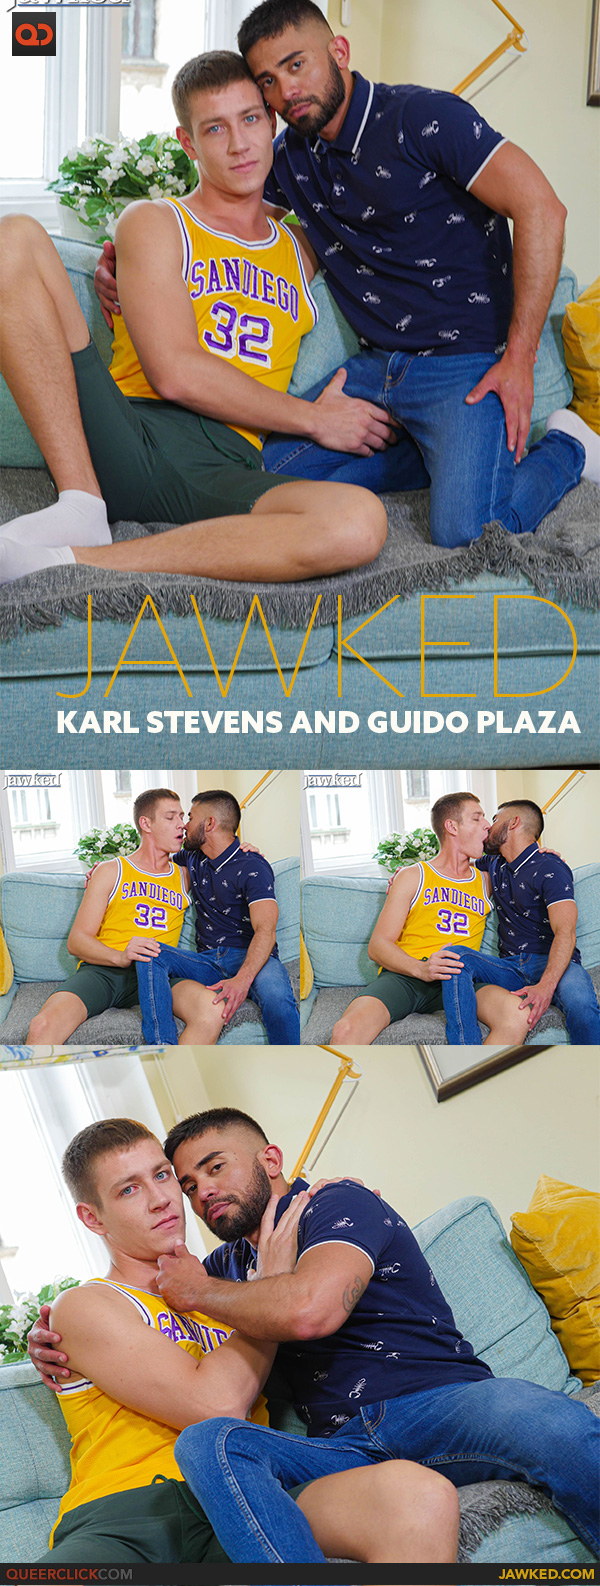 Jawked: Karl Stevens and Guido Plaza